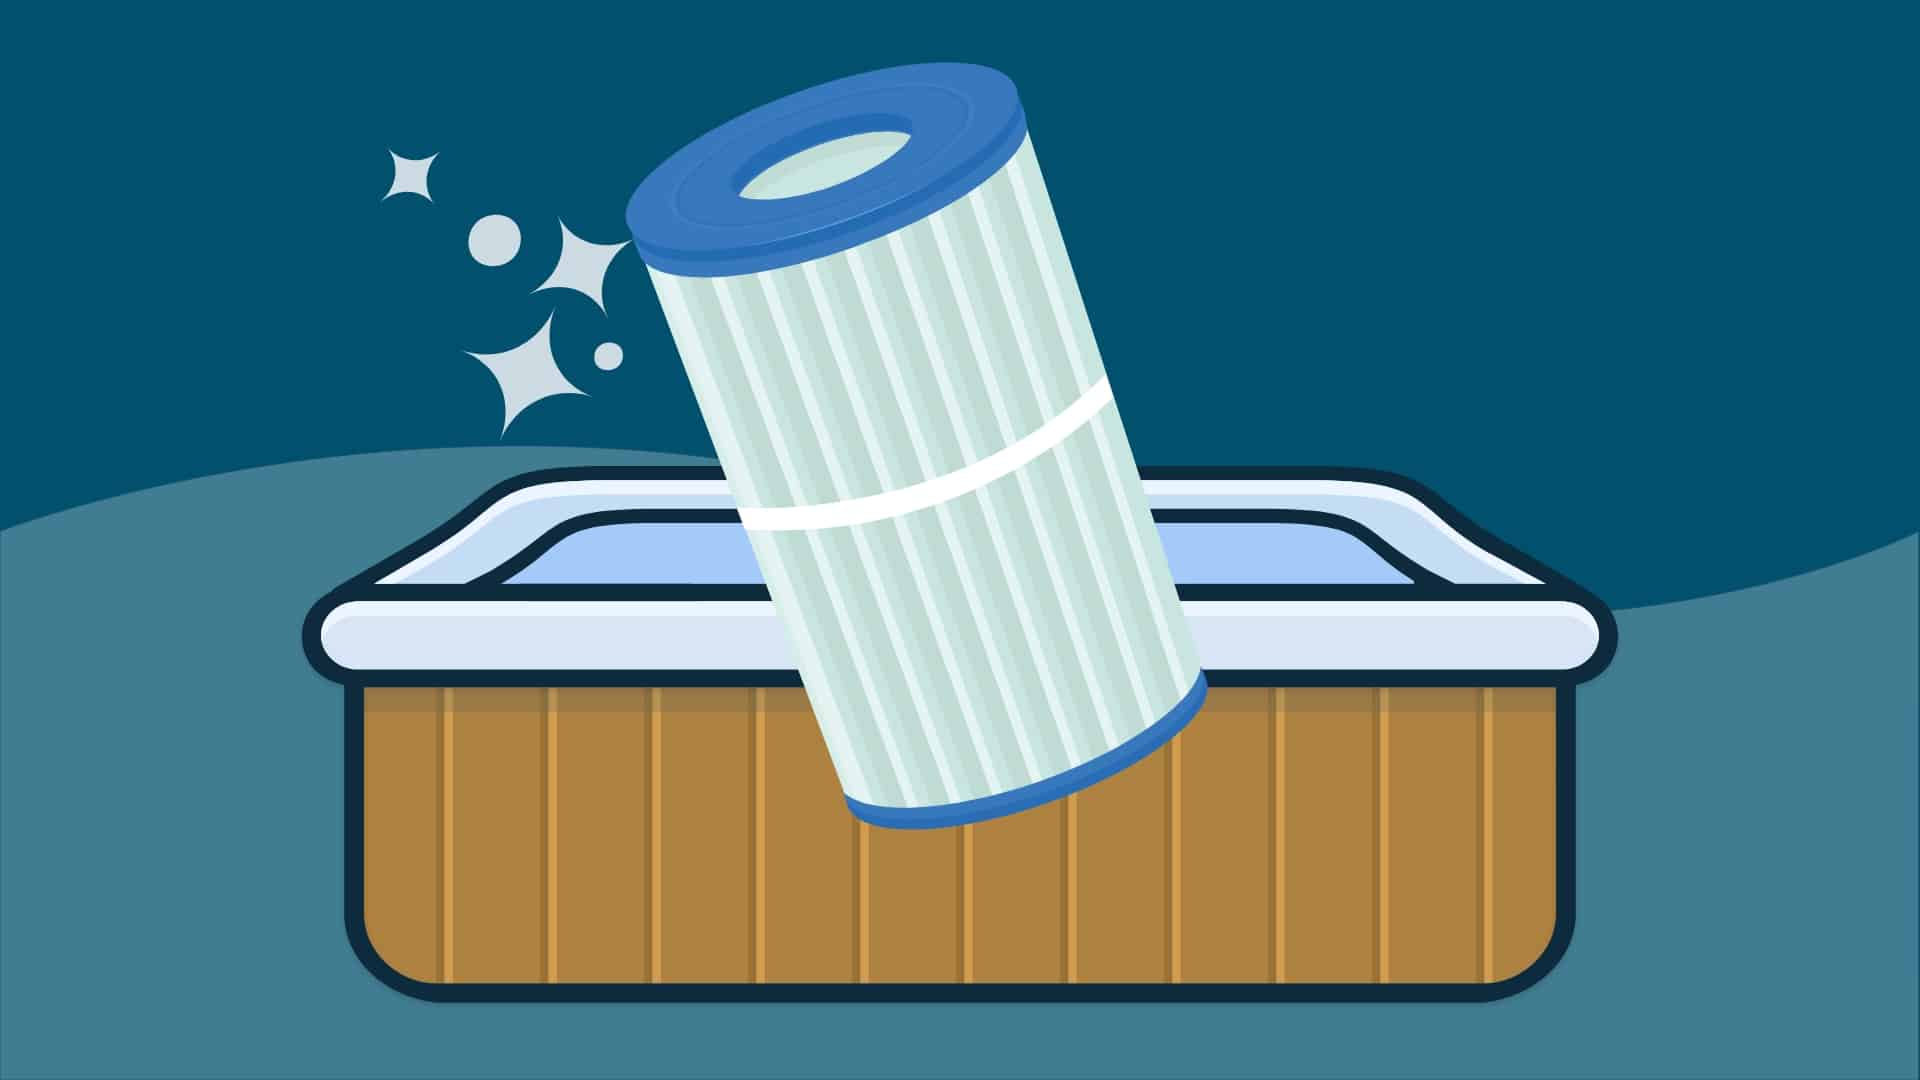 How to Clean Hot Tub Filters The Right Way